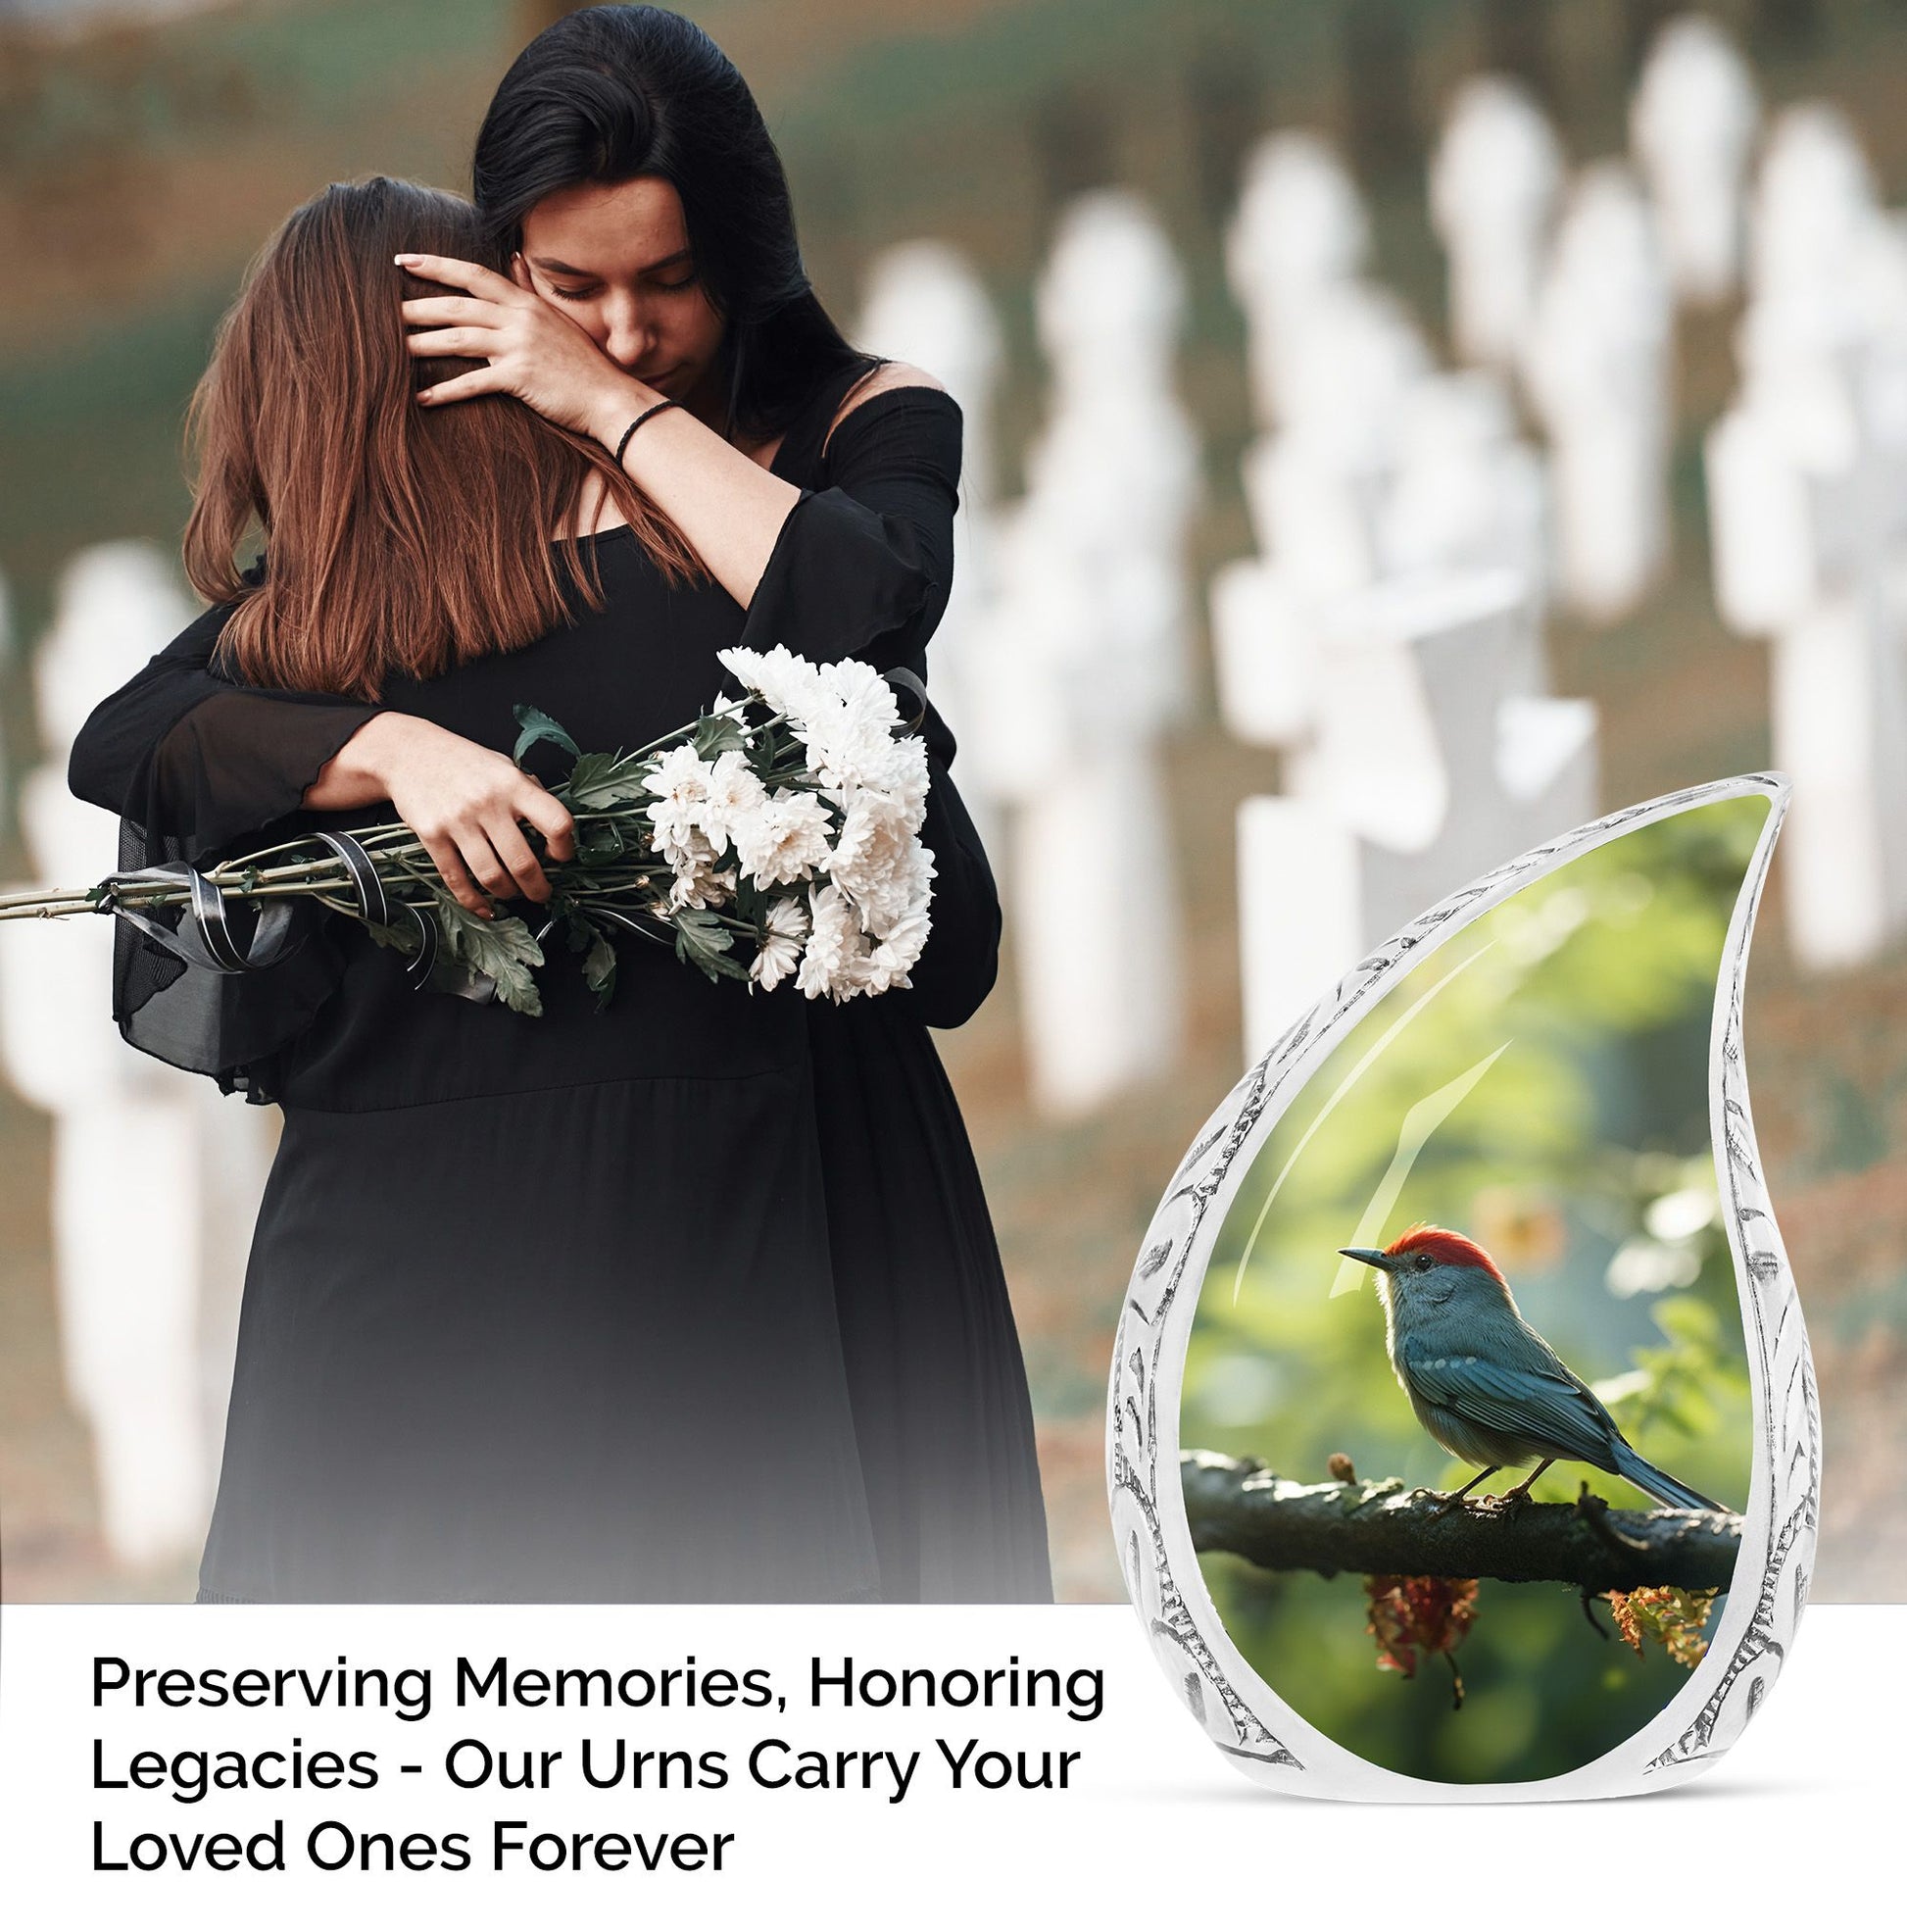 Large urn designed with a red sparrow on a branch theme, ideal for storing adult female human ashes